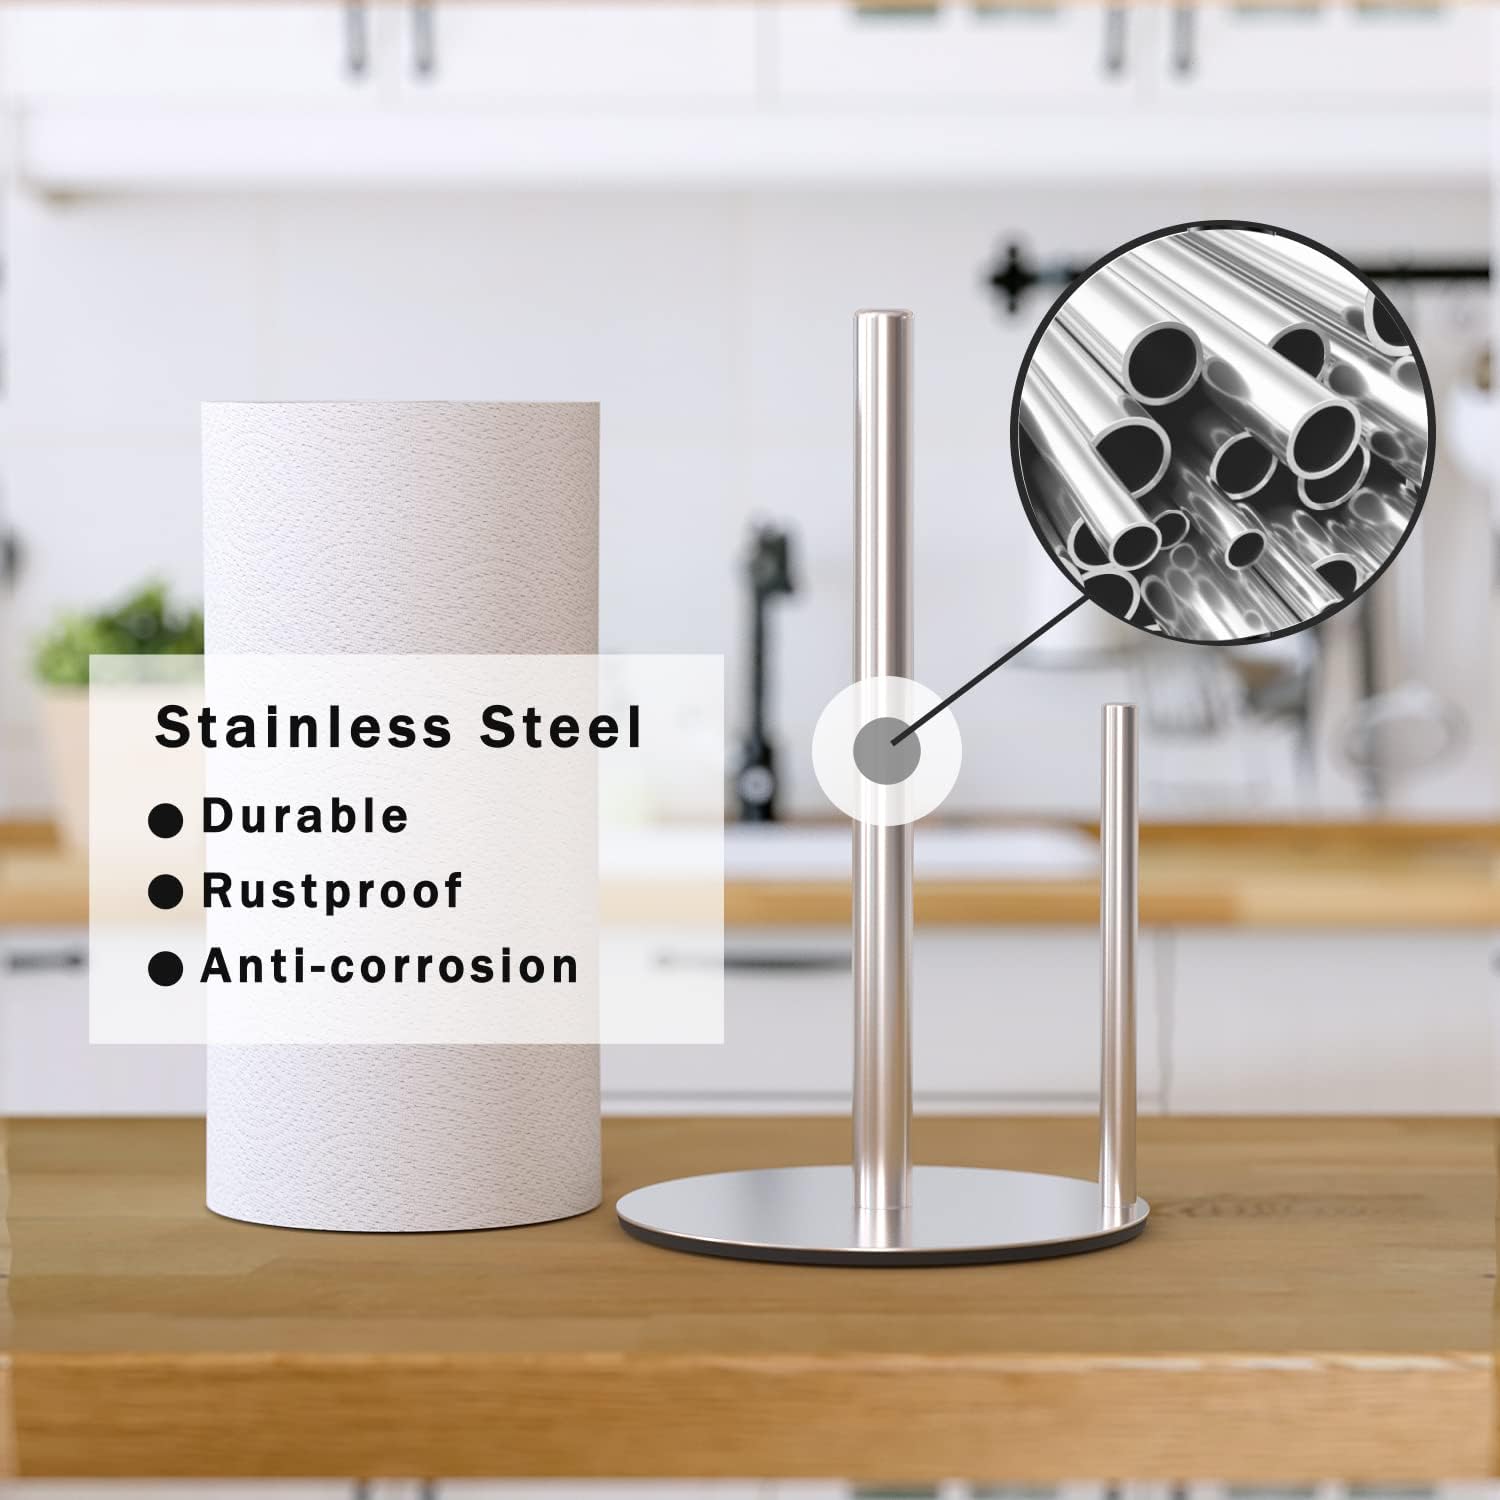 Wholesale prices with free shipping all over United States Paper Towel Holder Black Kitchen Roll Holder, Premium Stainless Steel, One-Handed Operation Countertop Dispenser with Weighted Base - Steven Deals